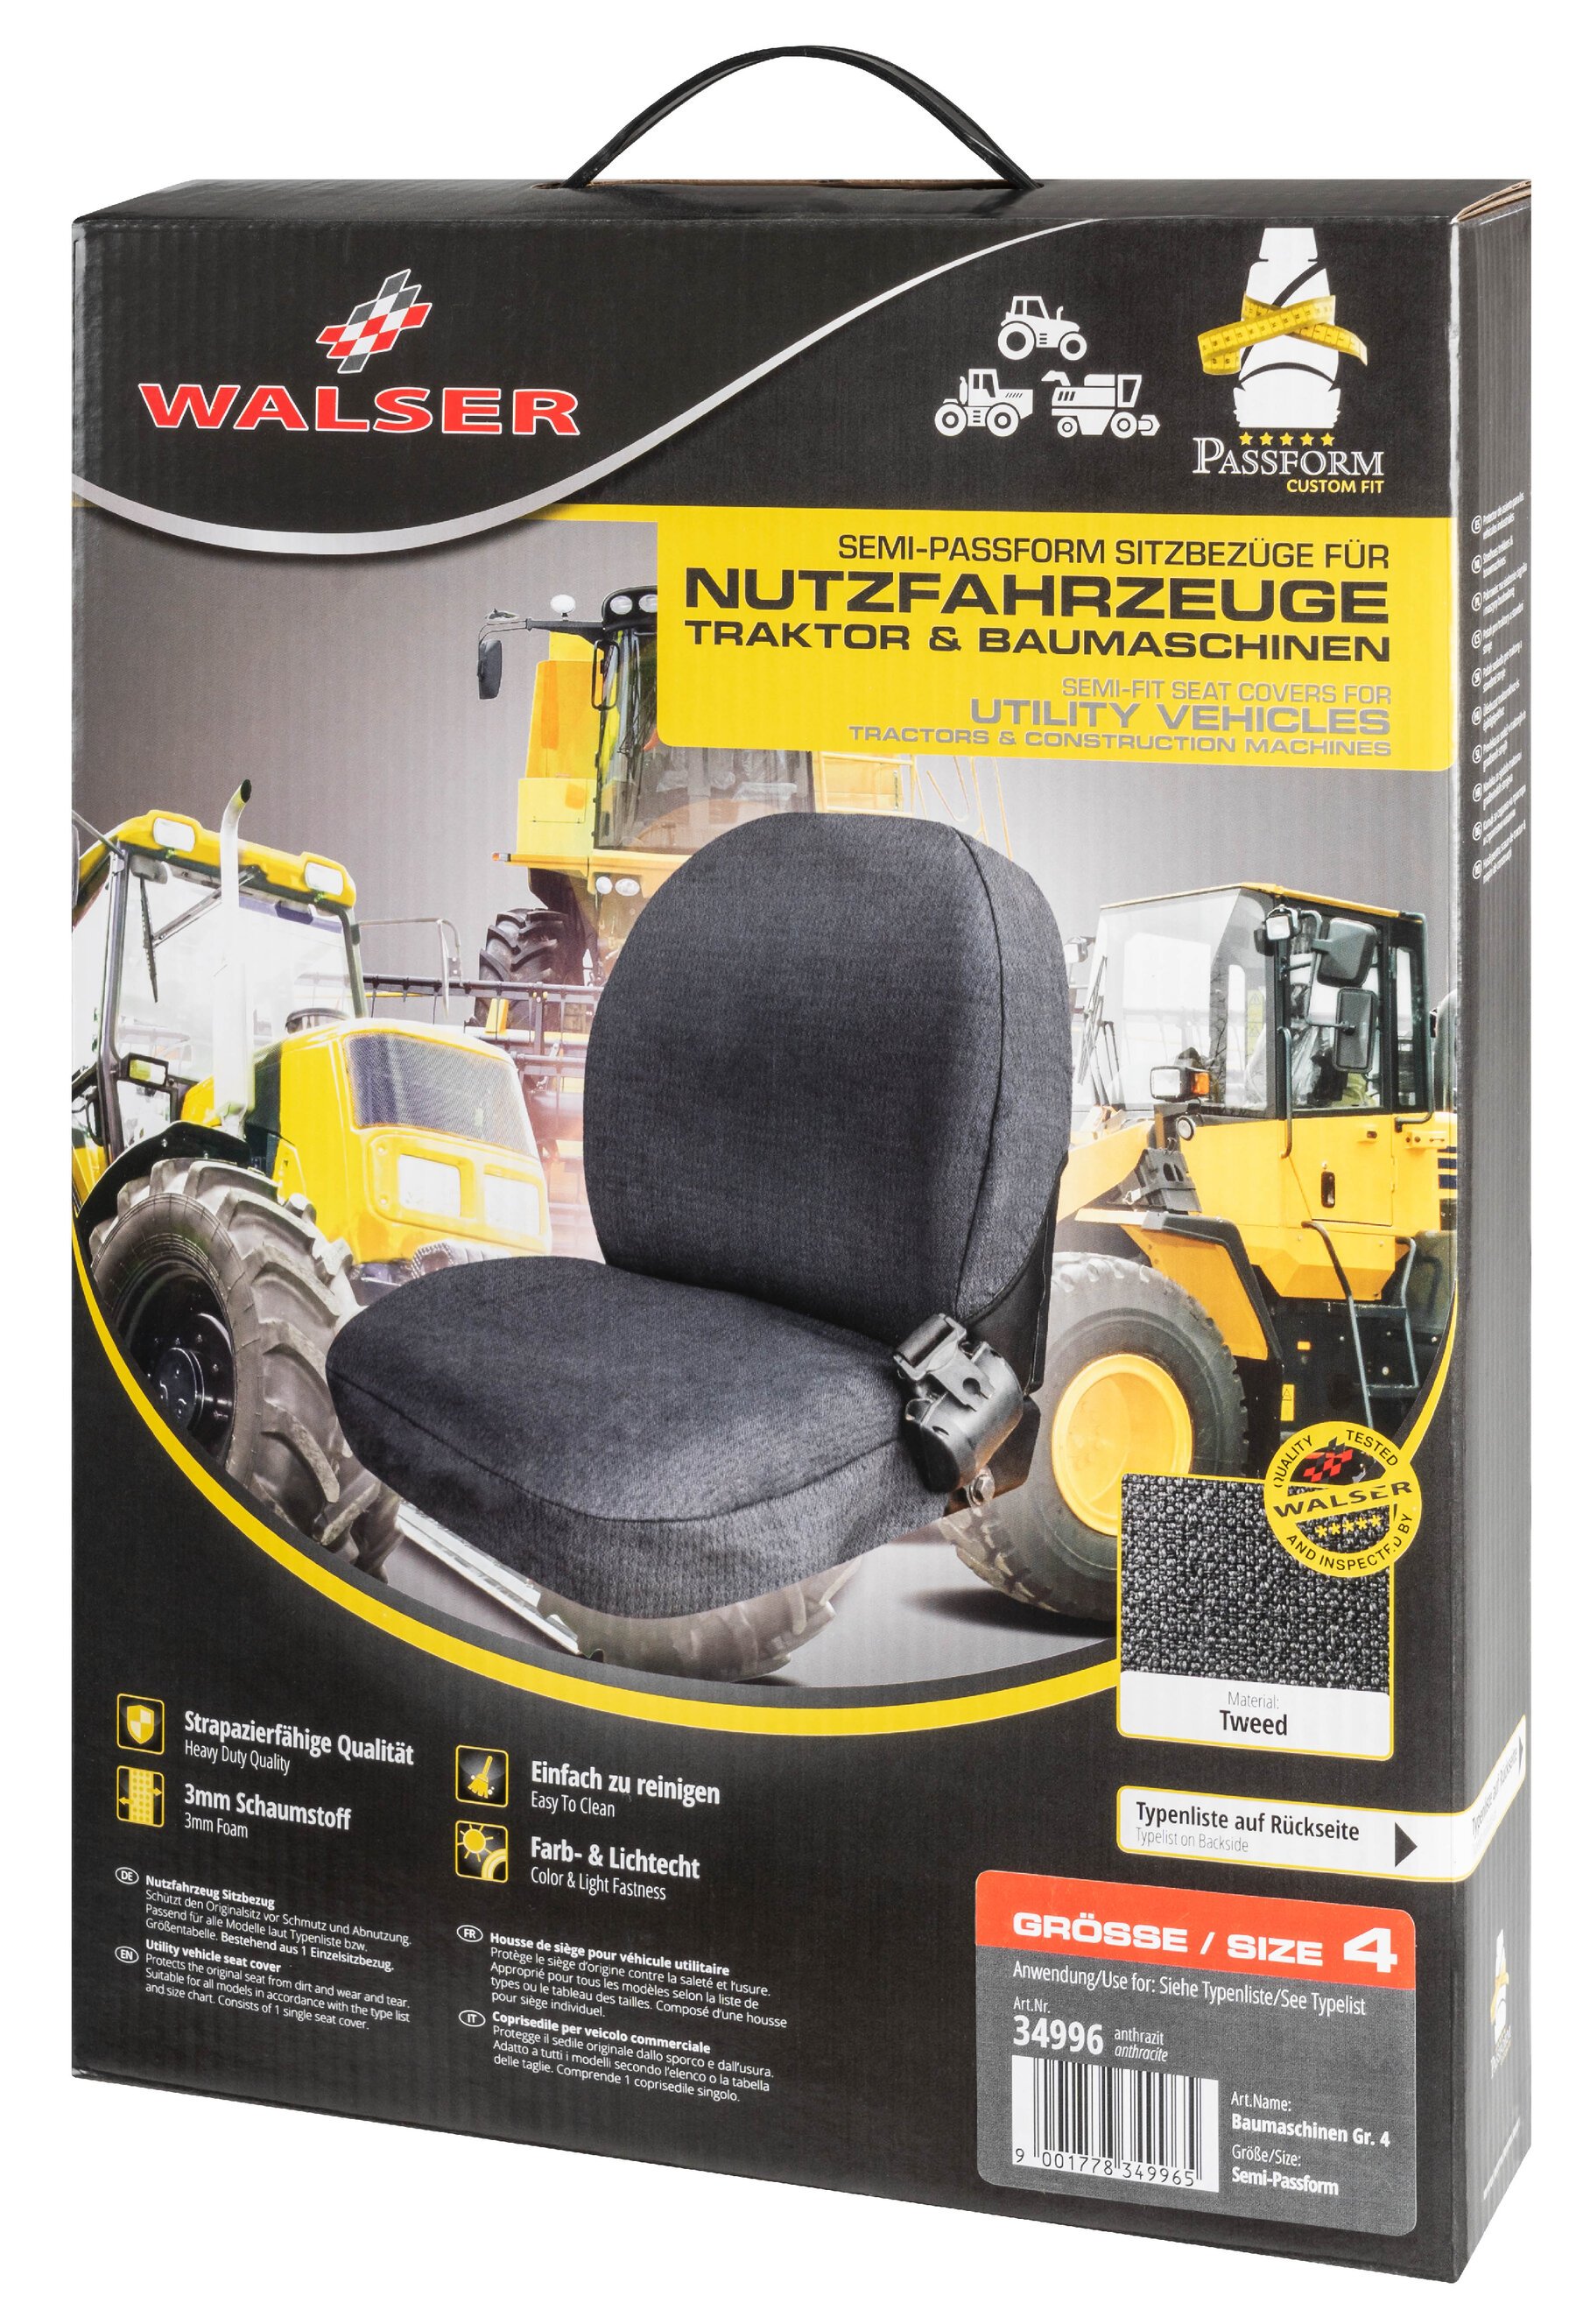 Semi-fit Seat cover for tractors and construction machinery - size 4